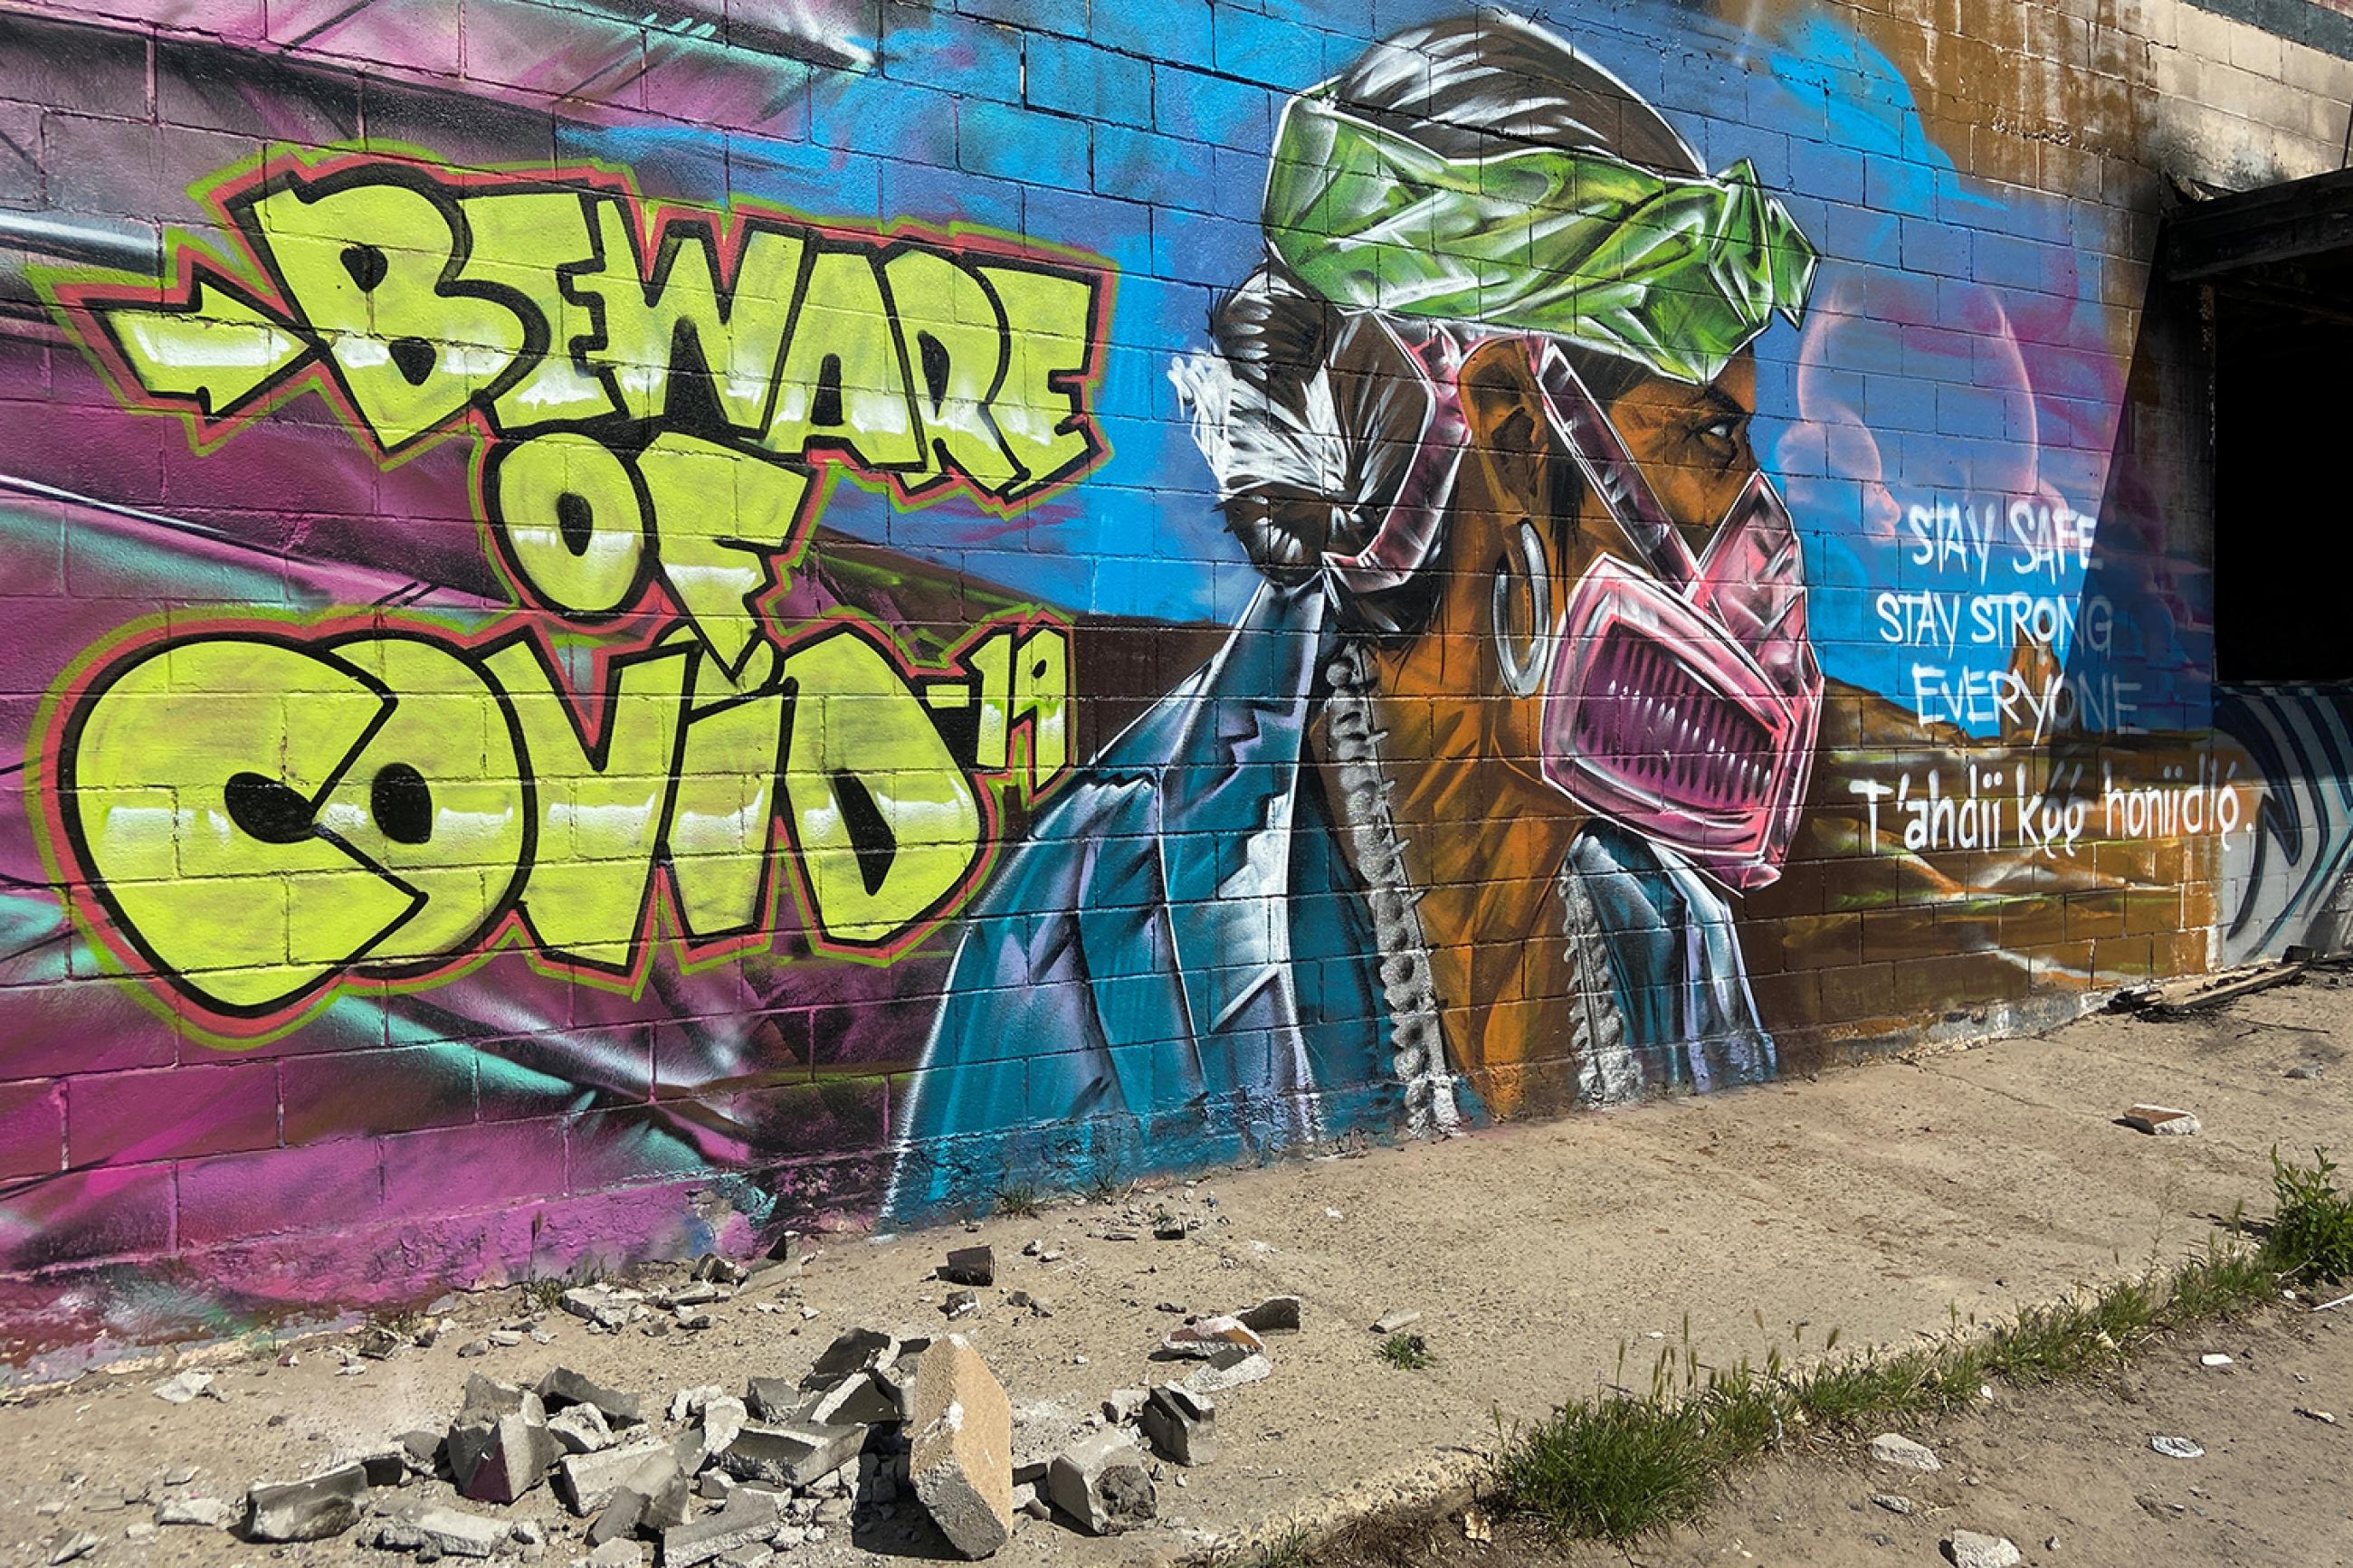 A mural warns residents of the danger of coronavirus disease (COVID-19) outbreak on the Navajo reservation, in Shiprock, New Mexico, U.S., April 8, 2020. Picture shows an amazing mural of a man wearing a mask painted on the side of a wall. REUTERS/Andrew Hay